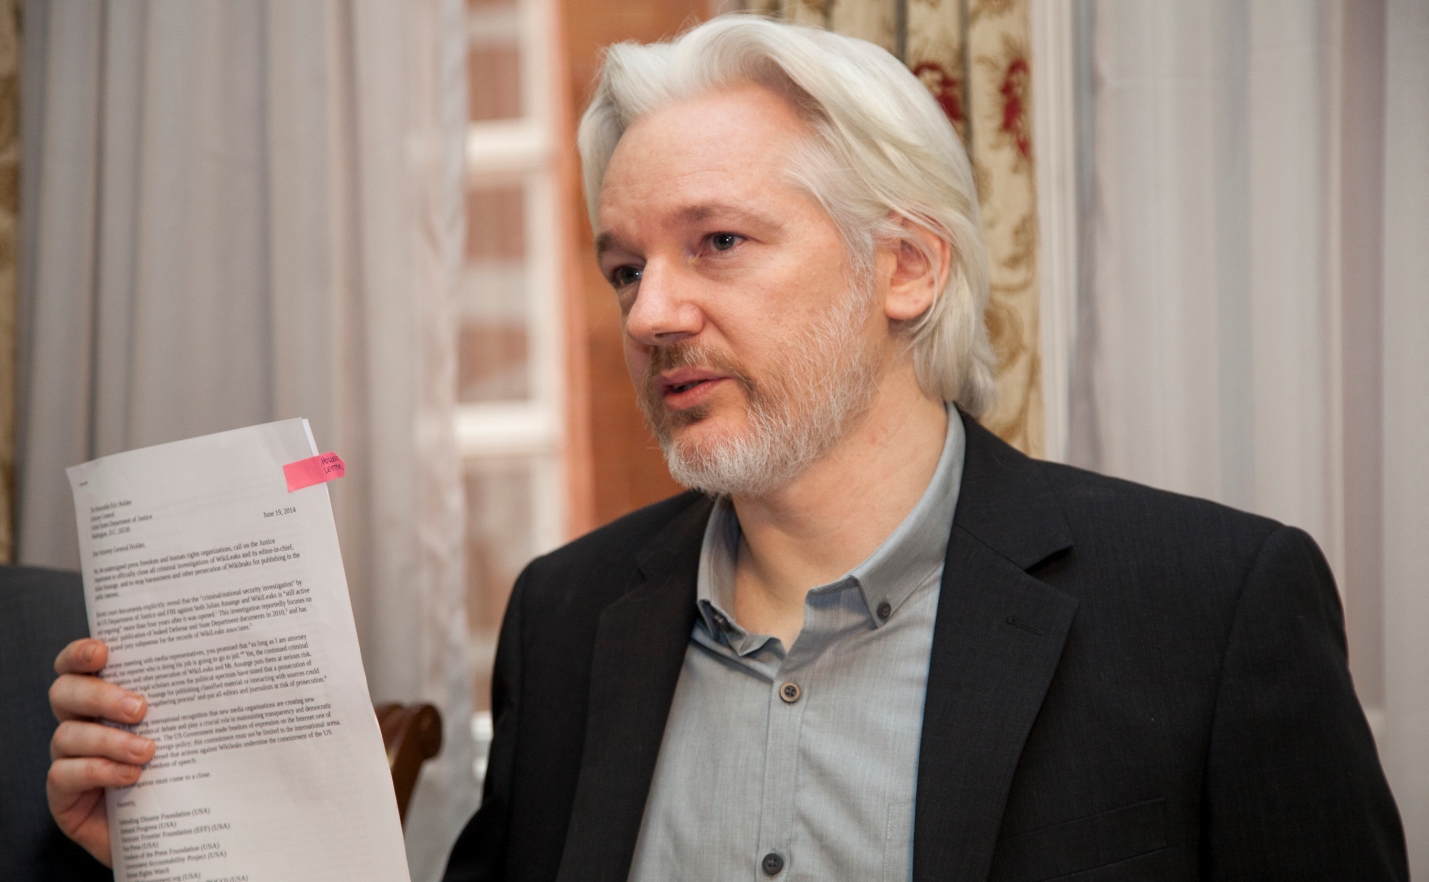 How is what Julian Assange has done with Wikileaks any different than U.S. newspaper coverage of Watergate or the Pentagon Papers?